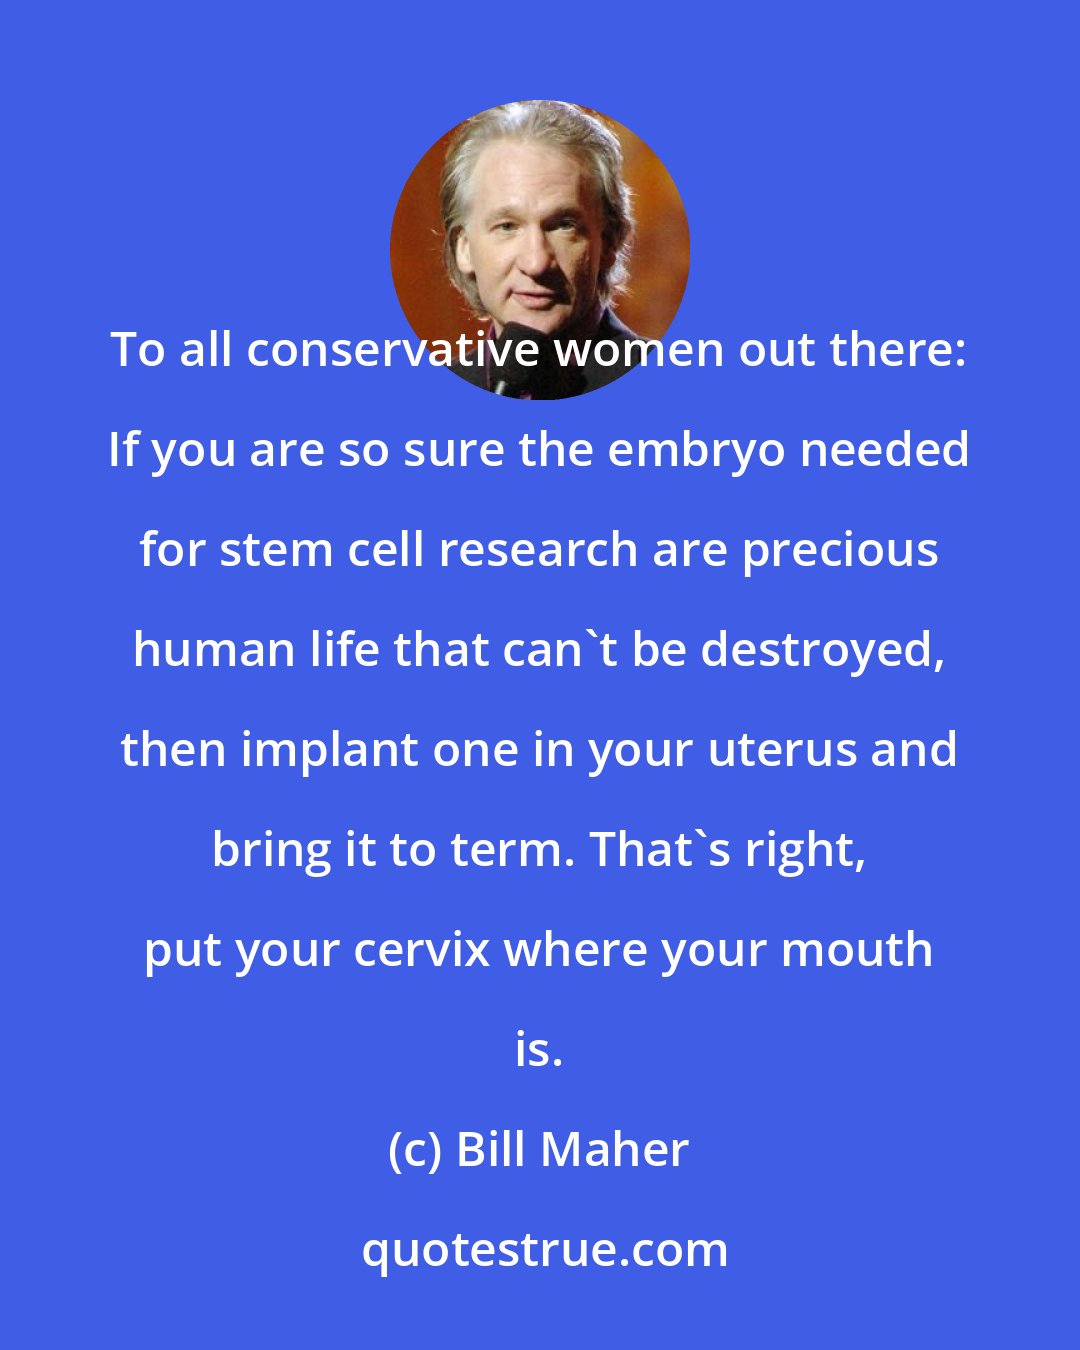 Bill Maher: To all conservative women out there: If you are so sure the embryo needed for stem cell research are precious human life that can't be destroyed, then implant one in your uterus and bring it to term. That's right, put your cervix where your mouth is.